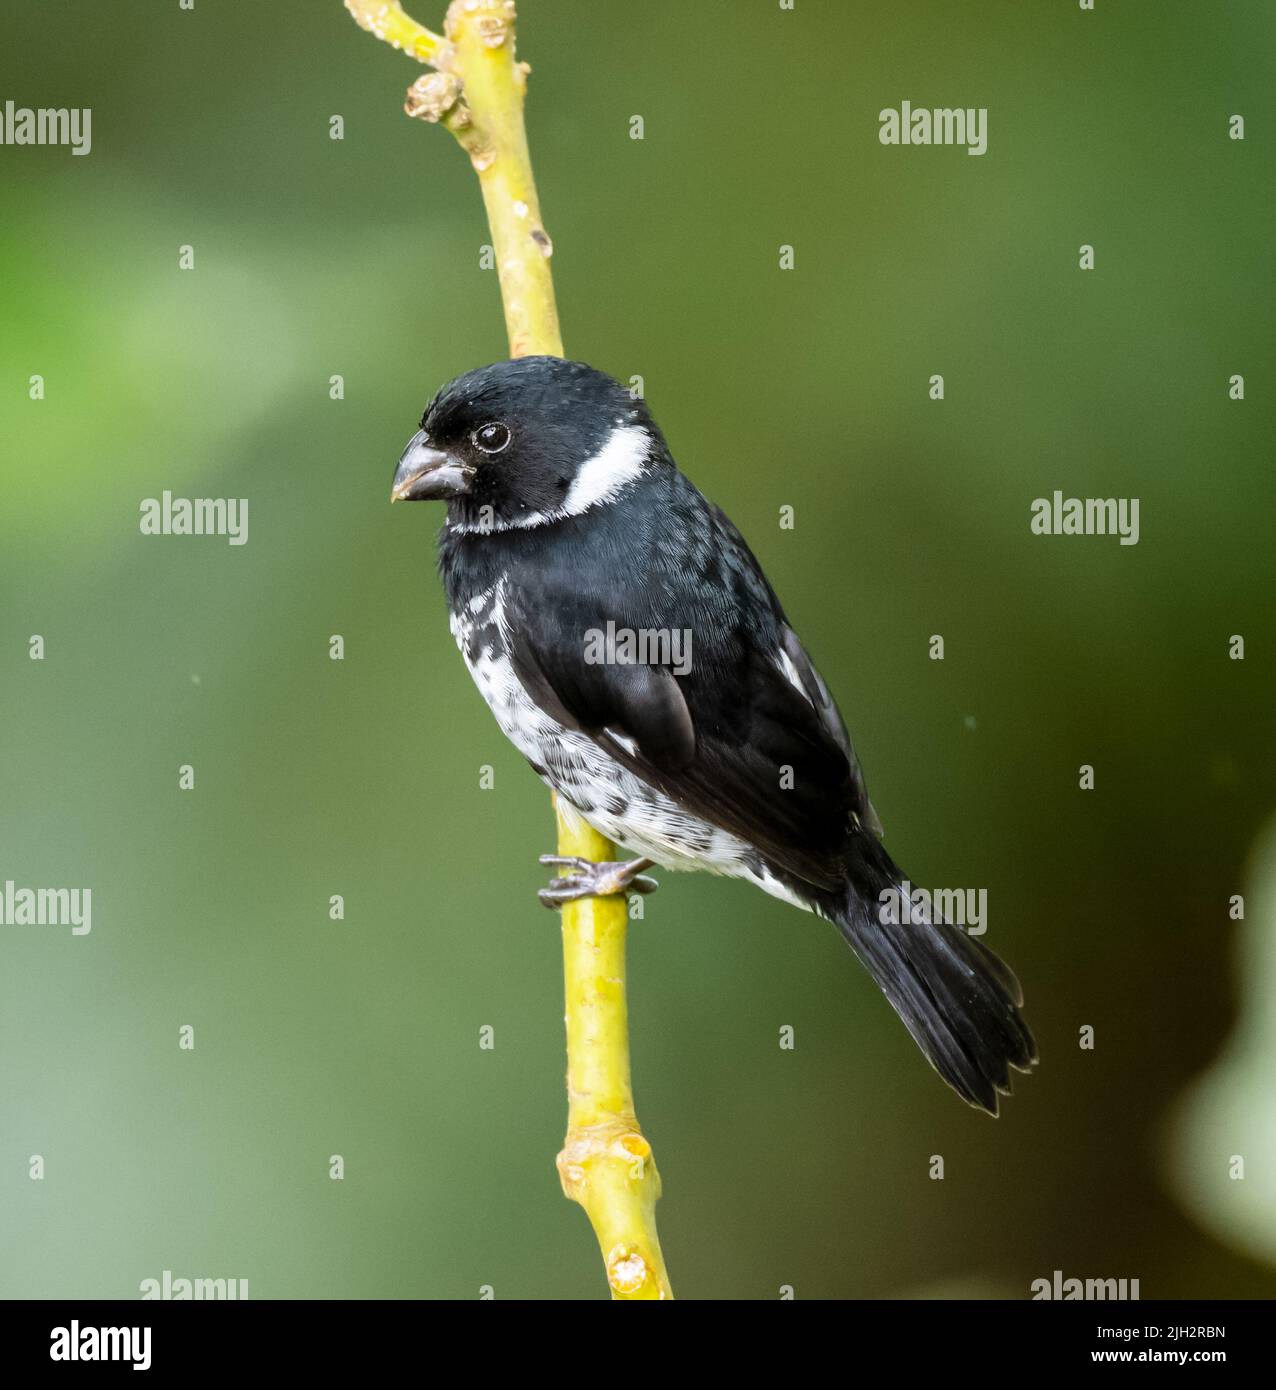 Variable seed eater perched on branch in Costa Rica mountains Stock Photo